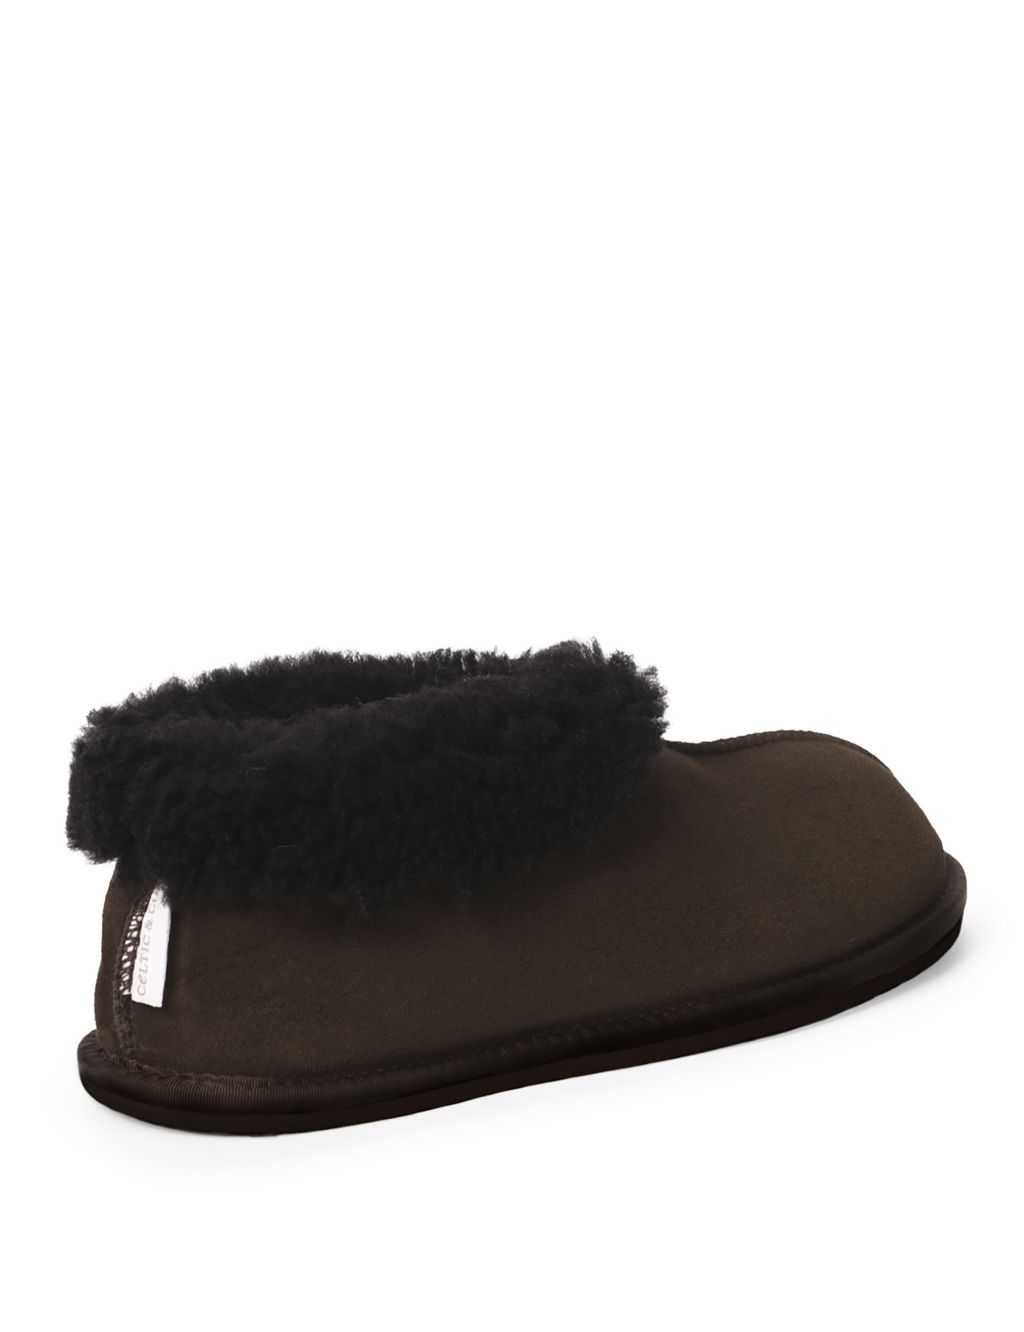 Suede Slipper Boots image 3